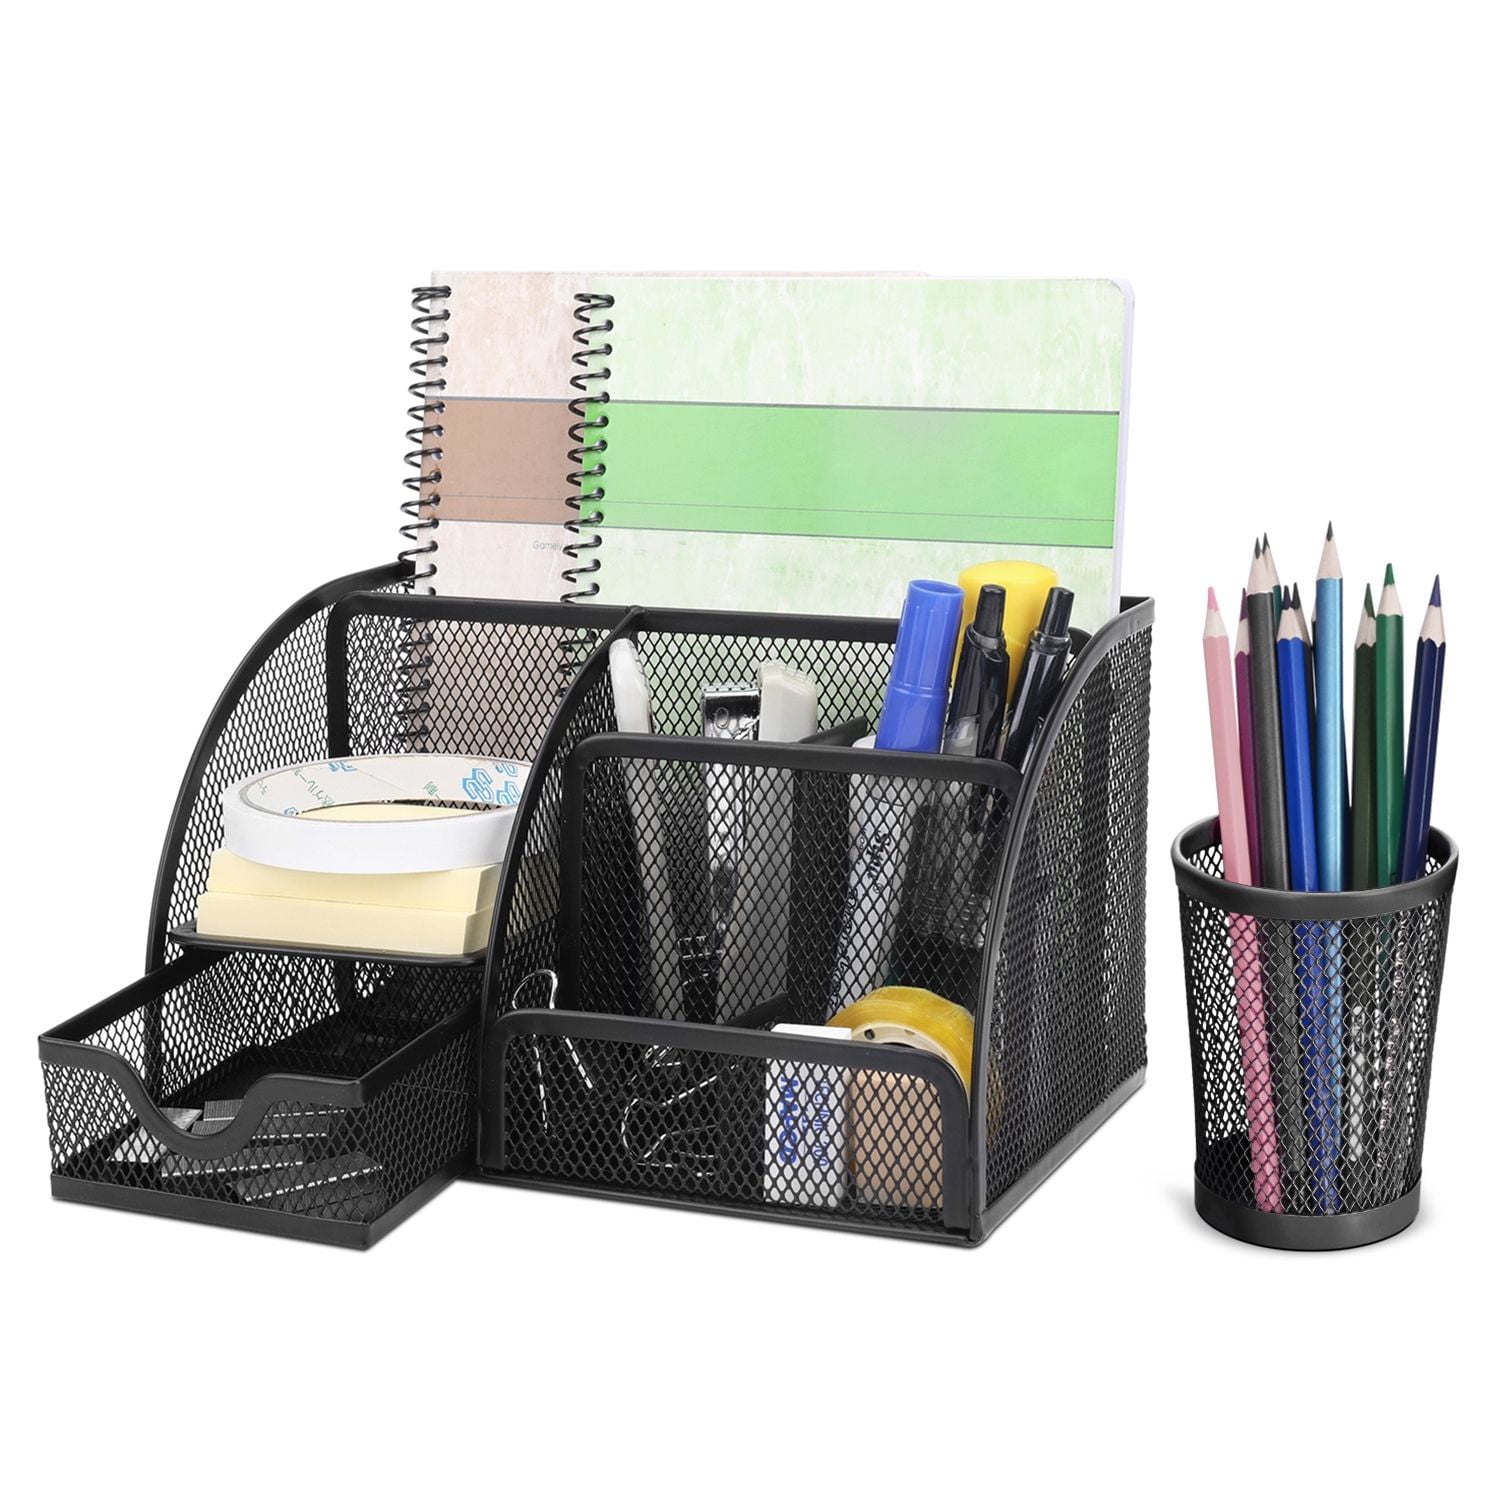 Pen Holder Metal Wire Mesh Pencil Container 4 Divided Compartments Home Office Supplies Desktop Accessory Organizer Magnetic Storage Basket Anti-Slip